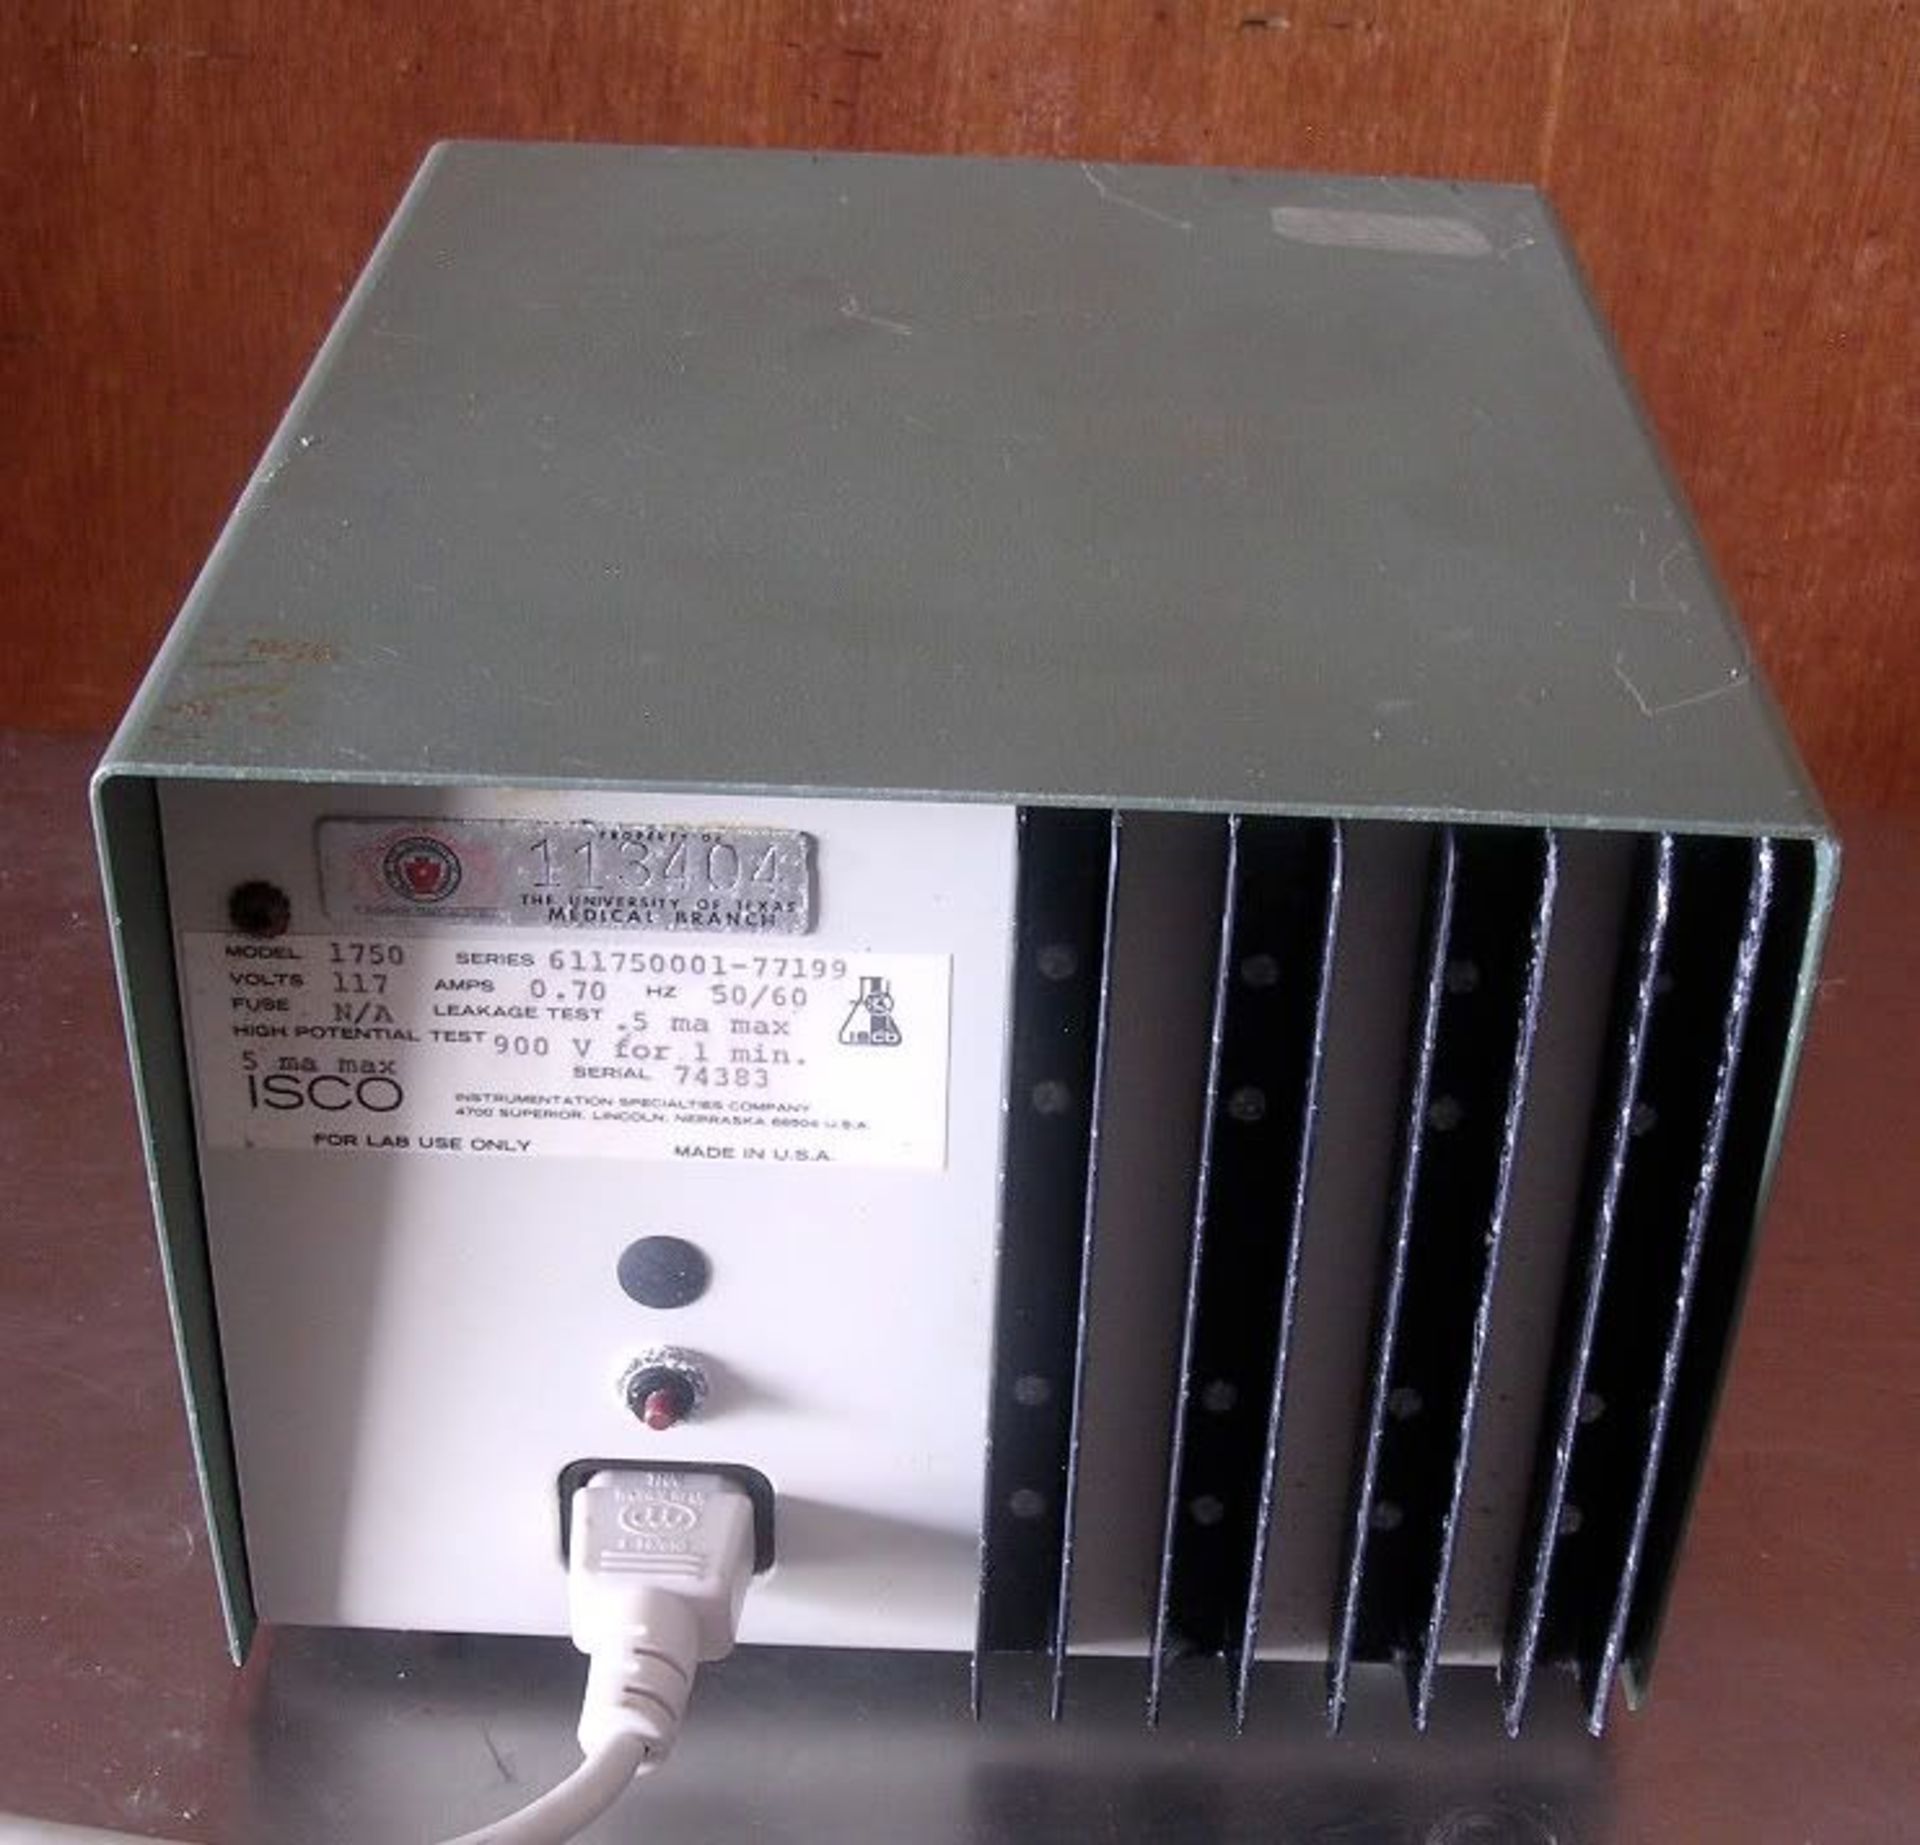 ISCO, 1750 Sample Concentrator Power Supply, Qty 1, 222227683782 - Image 3 of 4